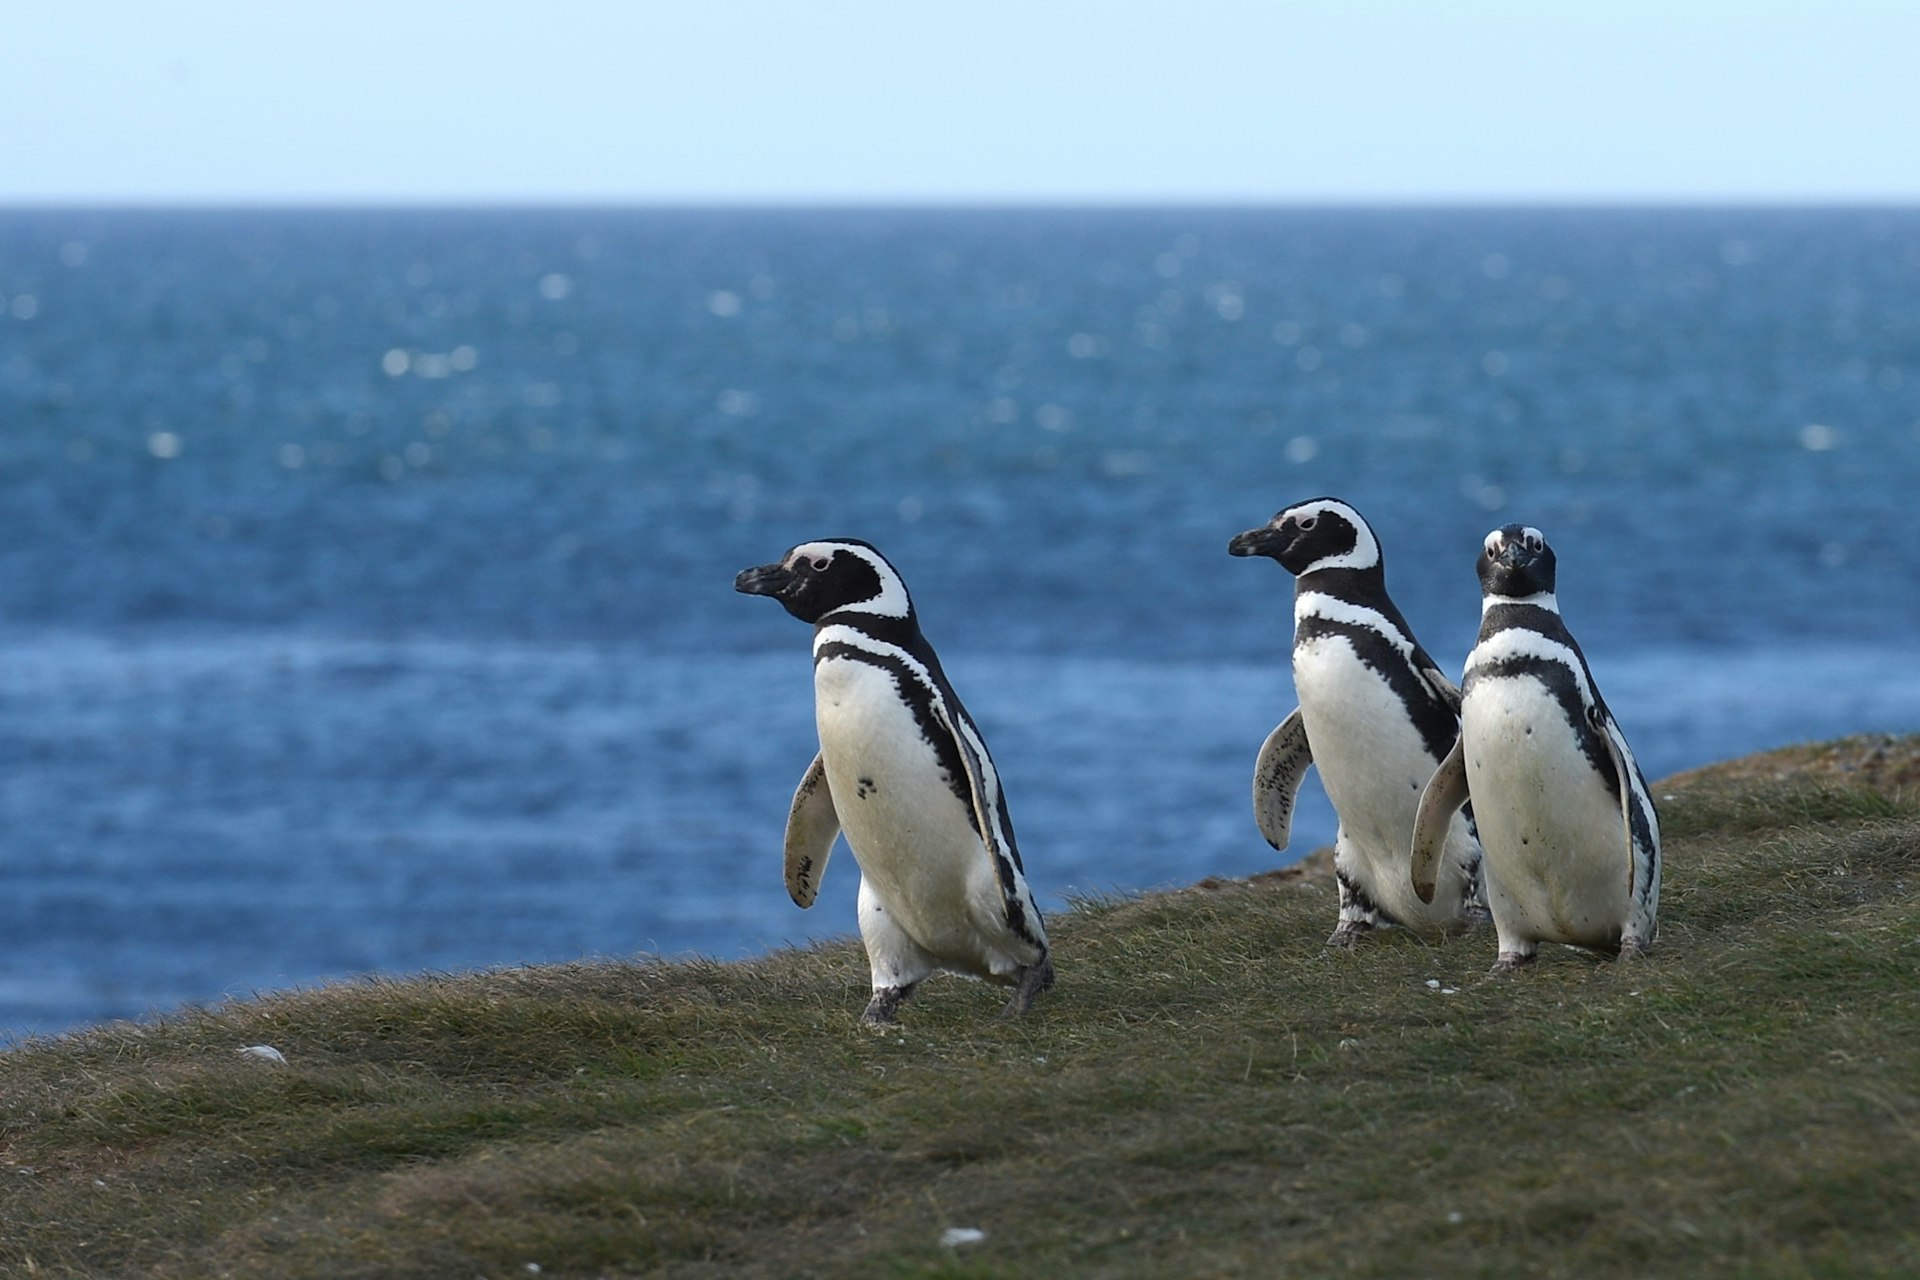 Magellanic penguins by the sea in Magdalena Island, Strait of Magellan, near Punta Arenas, Chile